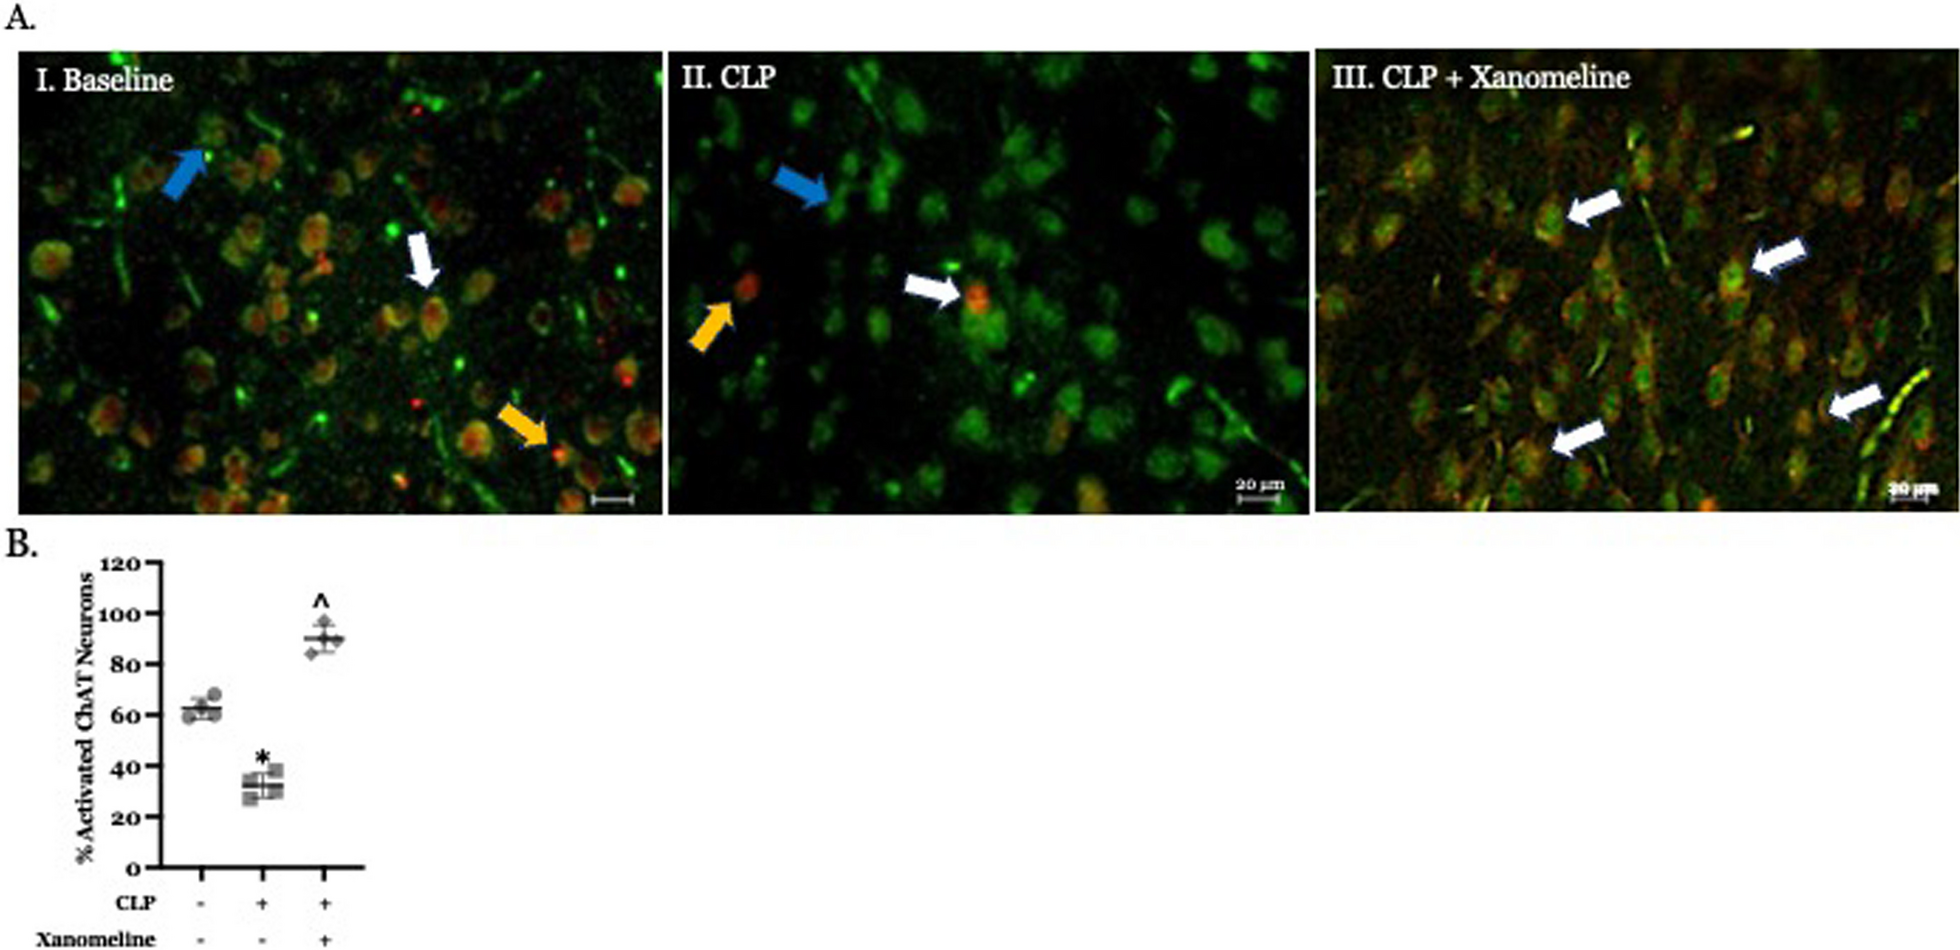 M1 cholinergic signaling in the brain modulates cytokine levels and splenic cell sub-phenotypes following cecal ligation and puncture